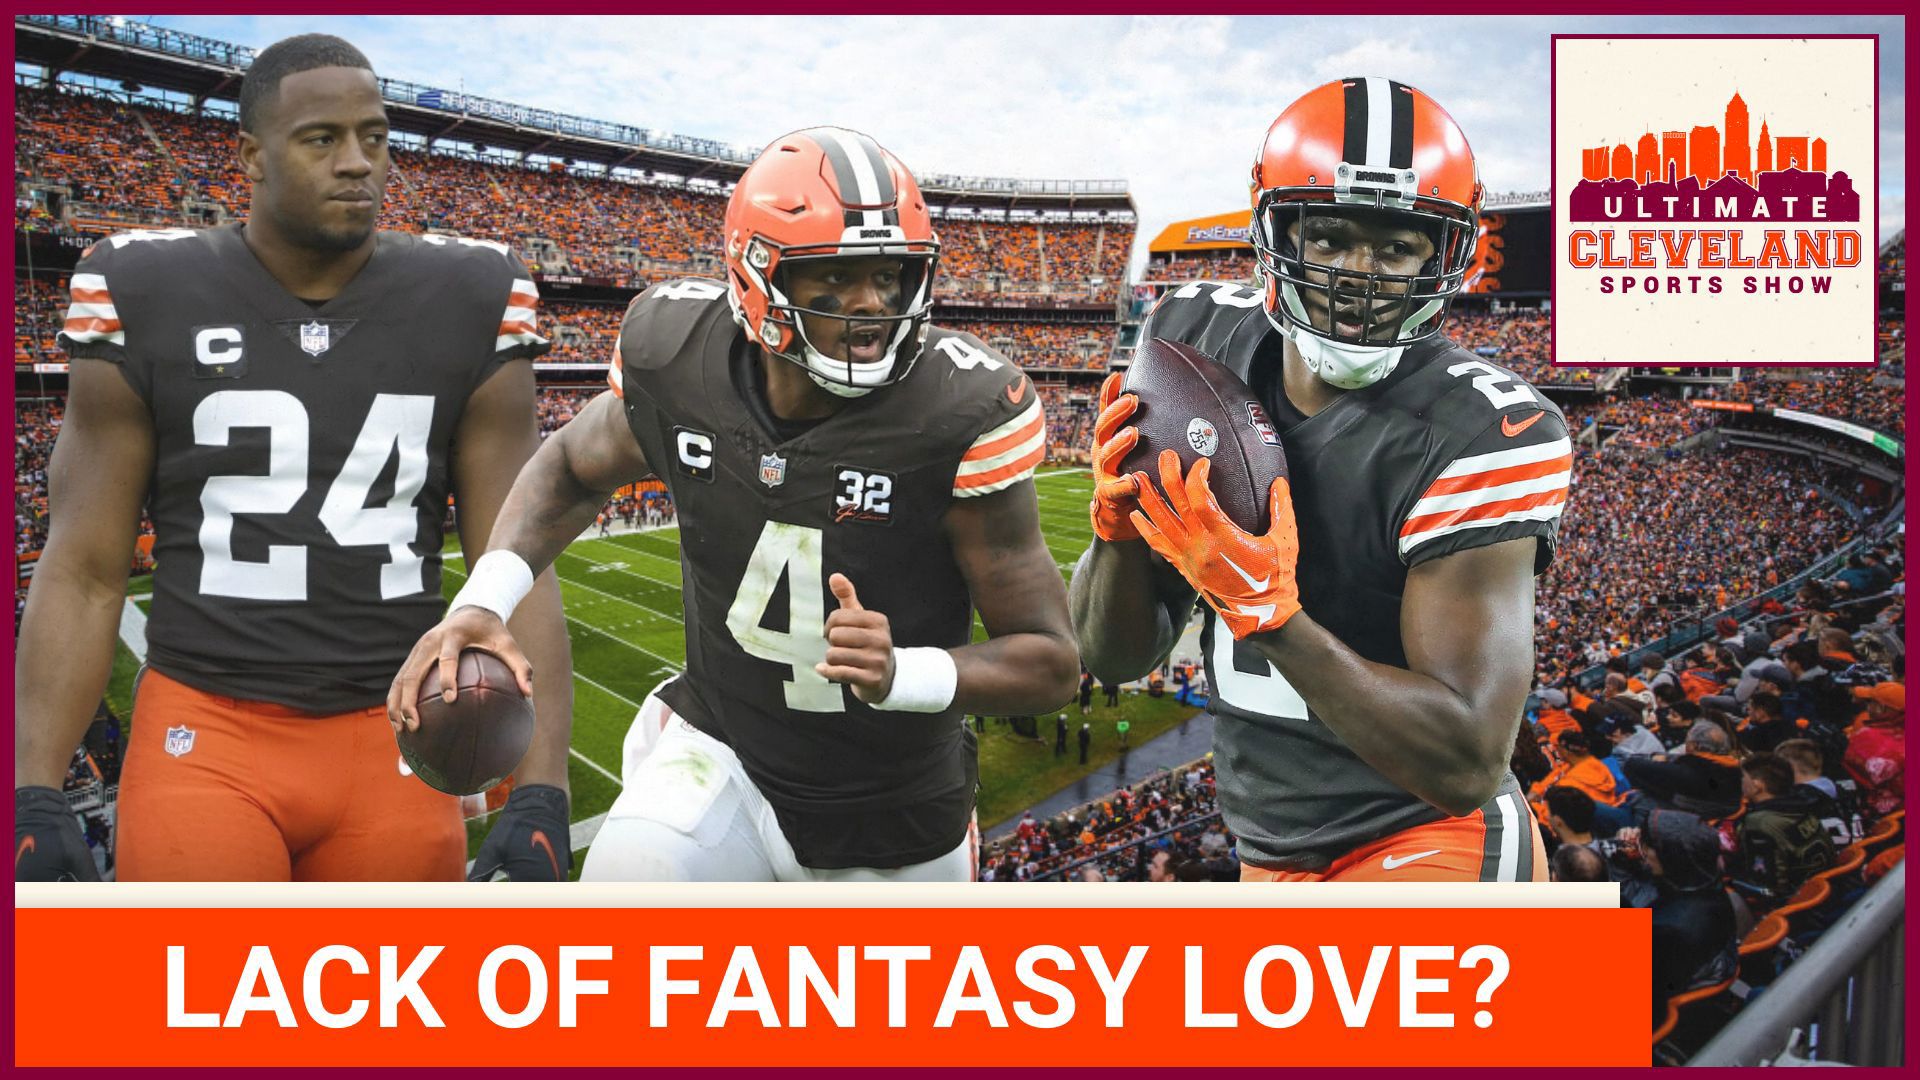 Where are the Cleveland Browns stars being ranked on a fantasy football level?